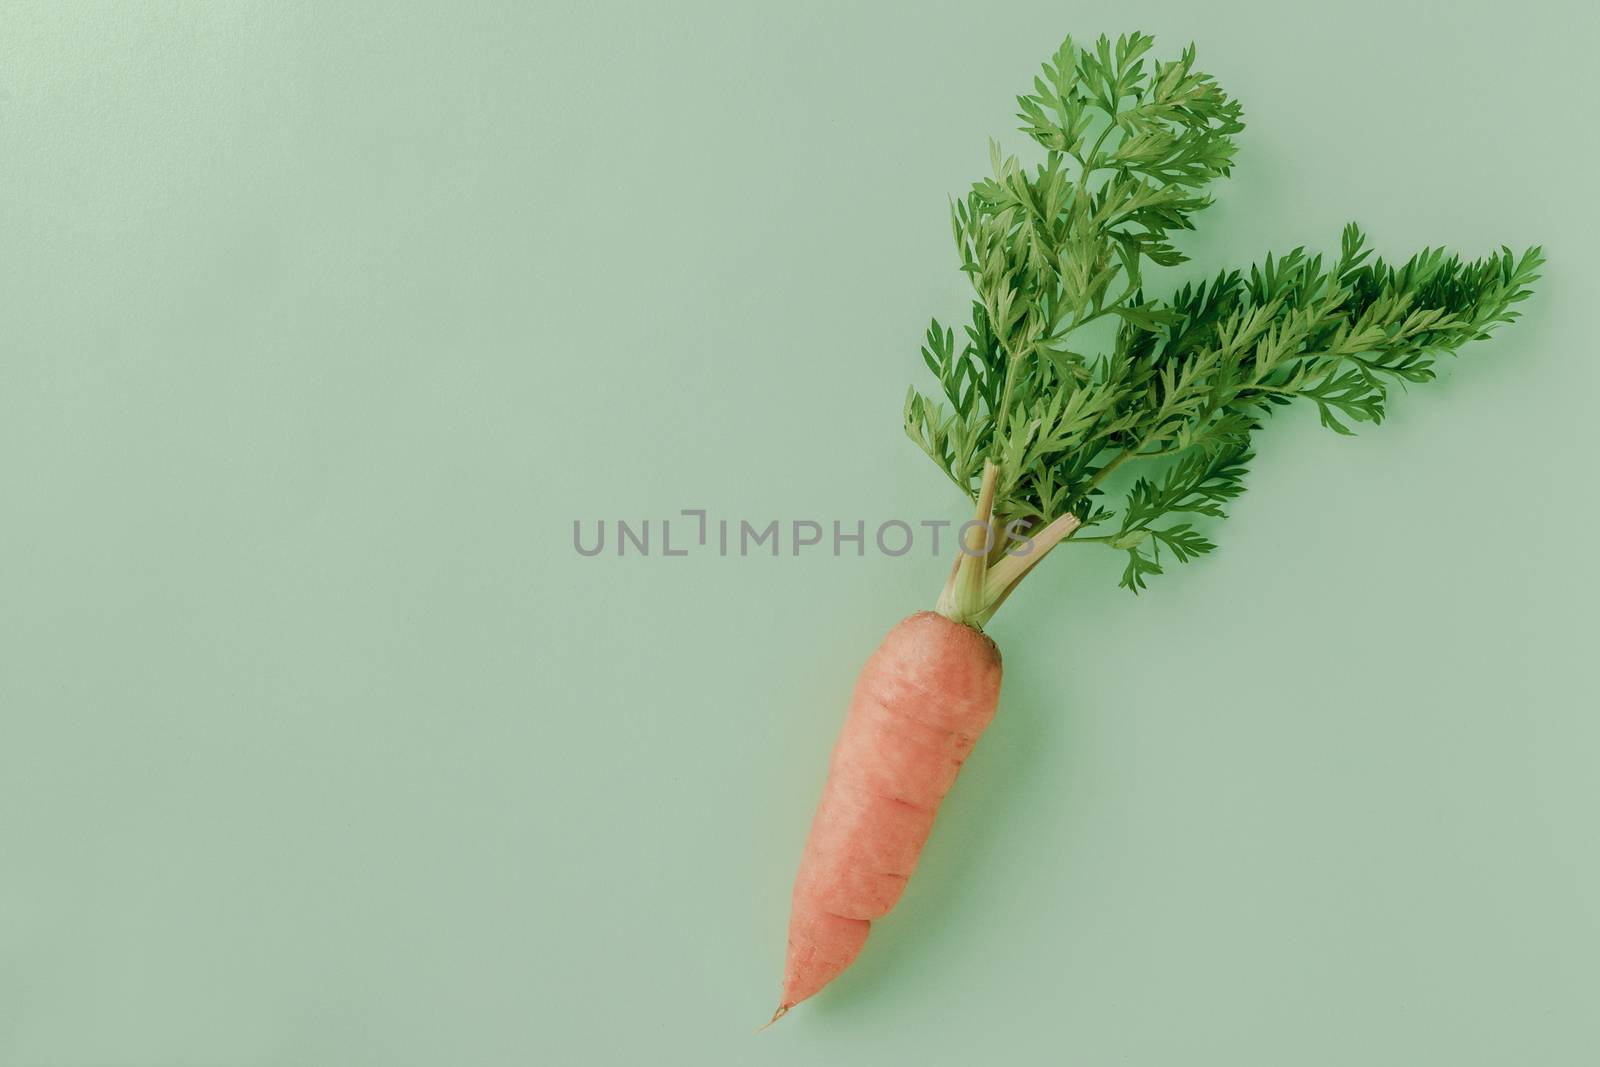 A few fresh carrots on green background. by Aedka_Stodio